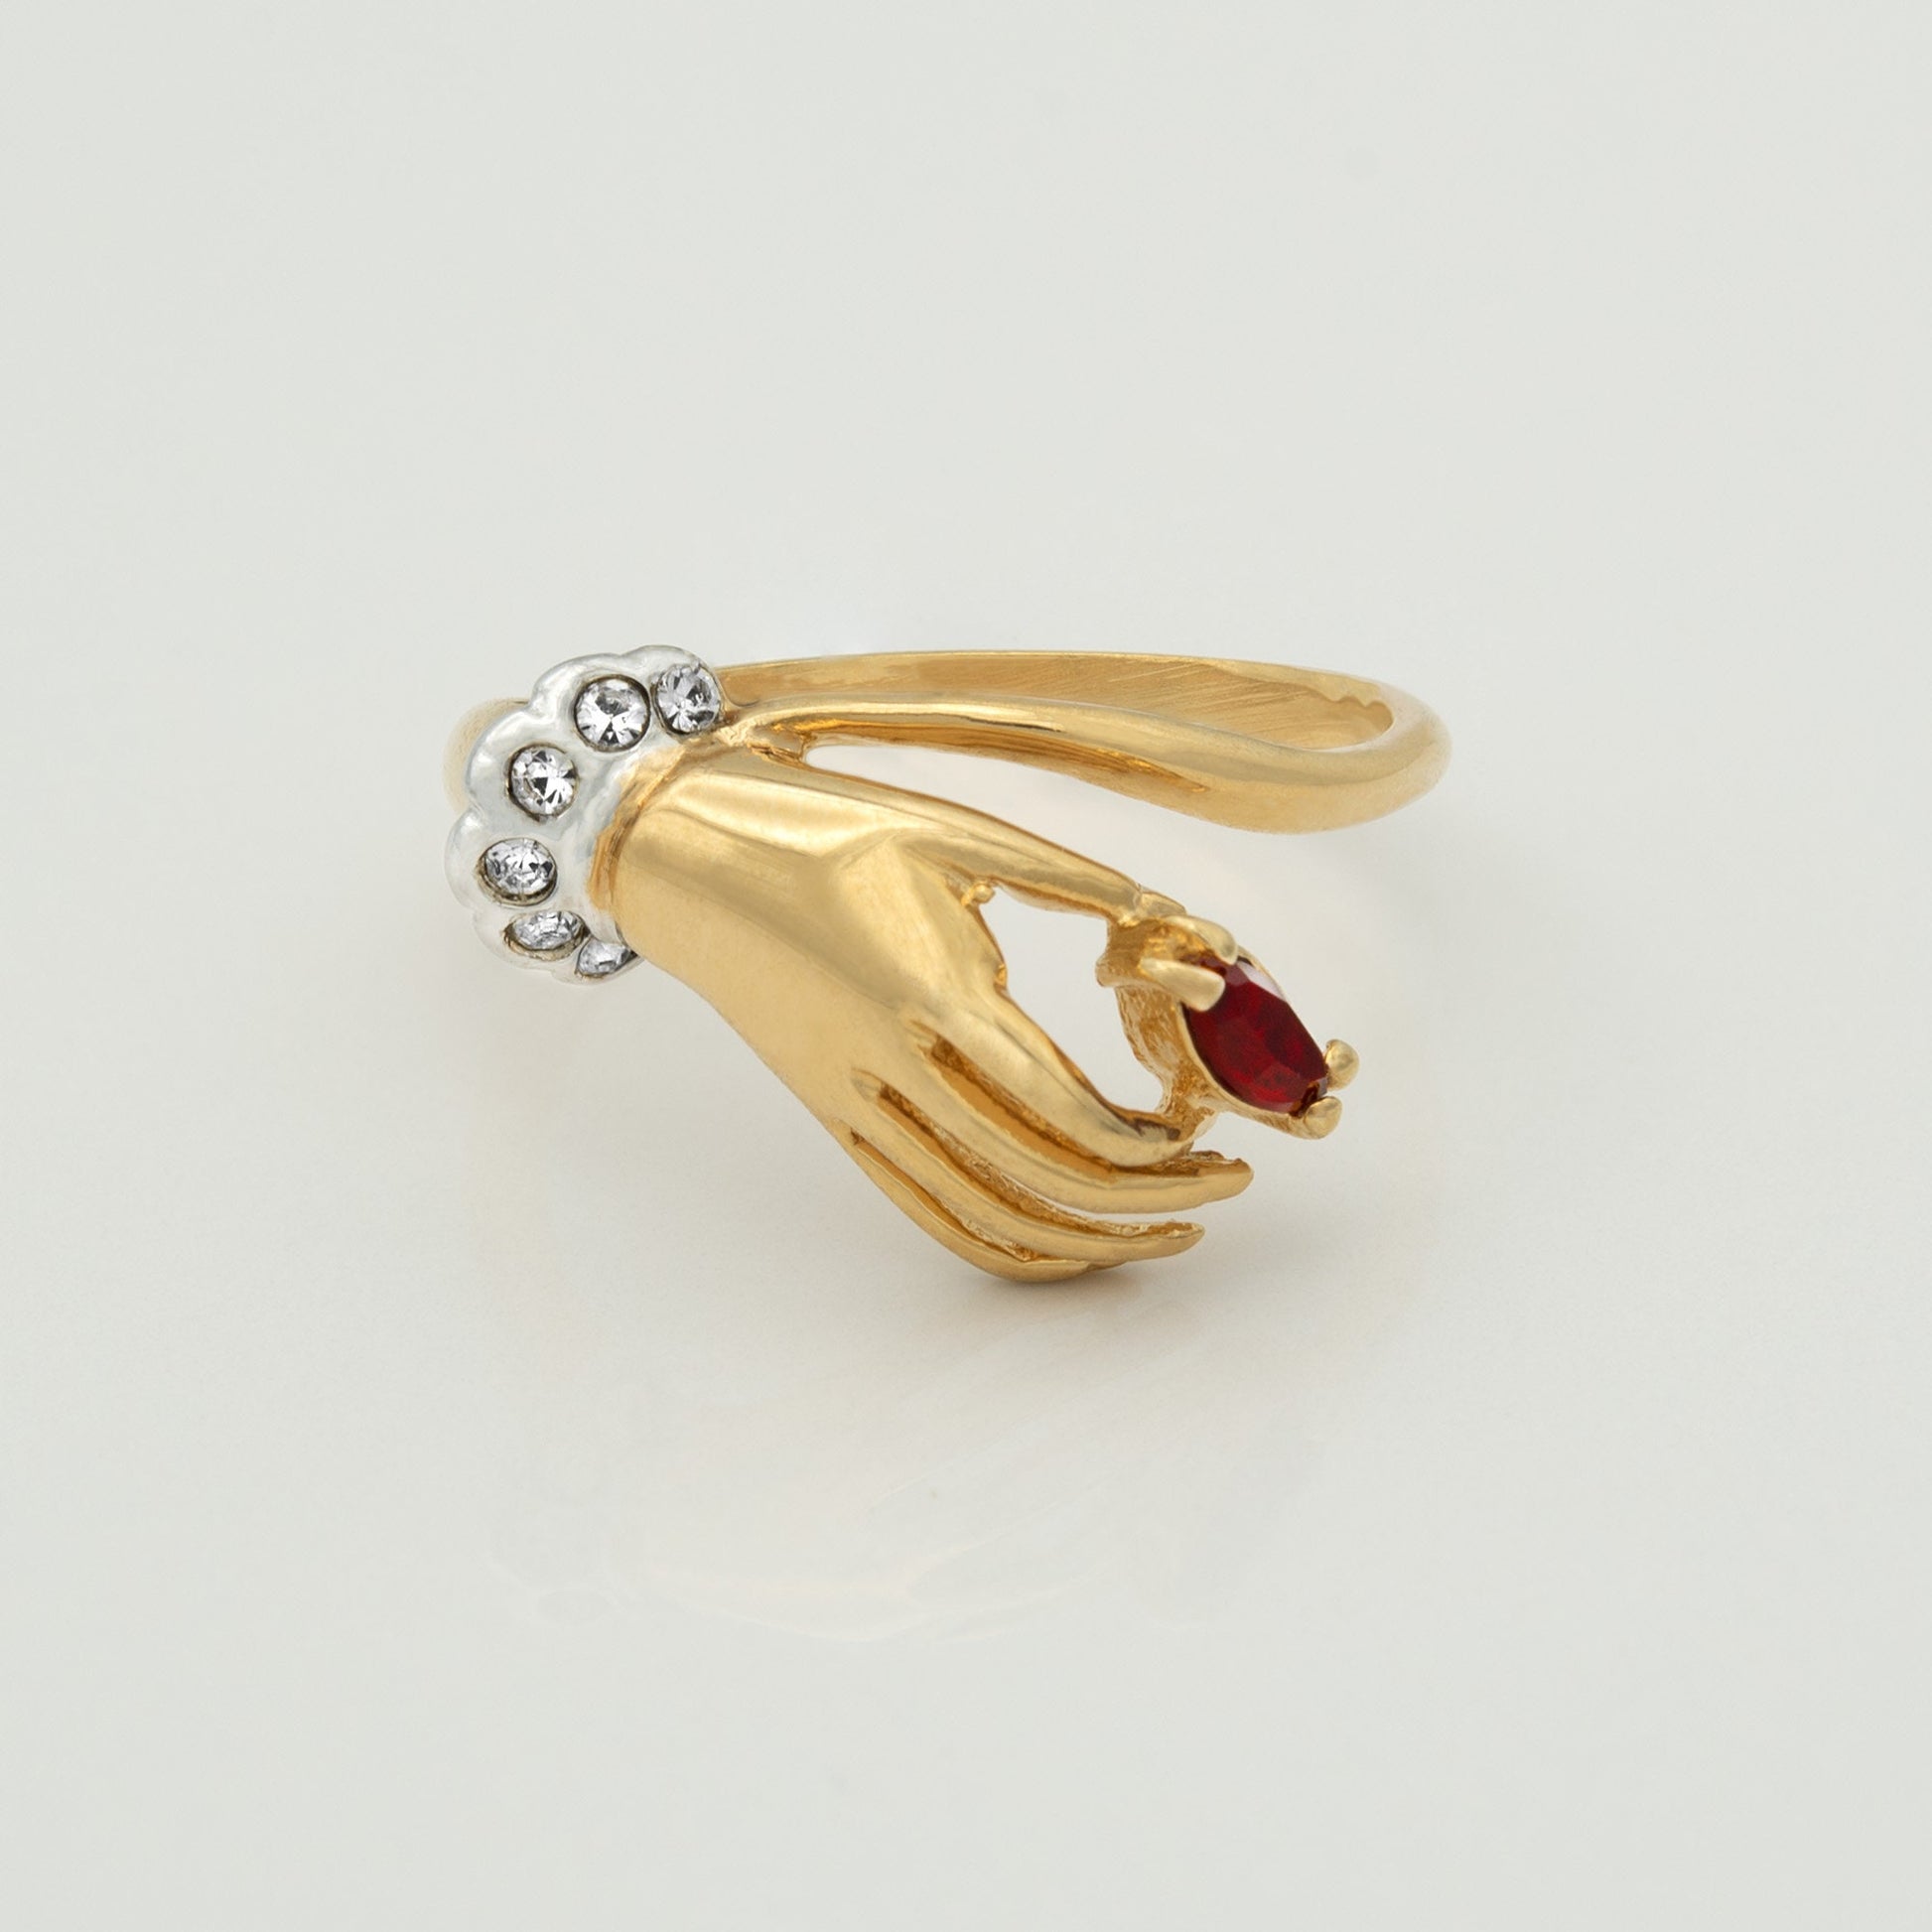 Vintage Ring Ruby Clear Austrian Crystals 18k Gold Womans Antique Rings For Women #R2964 - Limited Stock - Never Worn